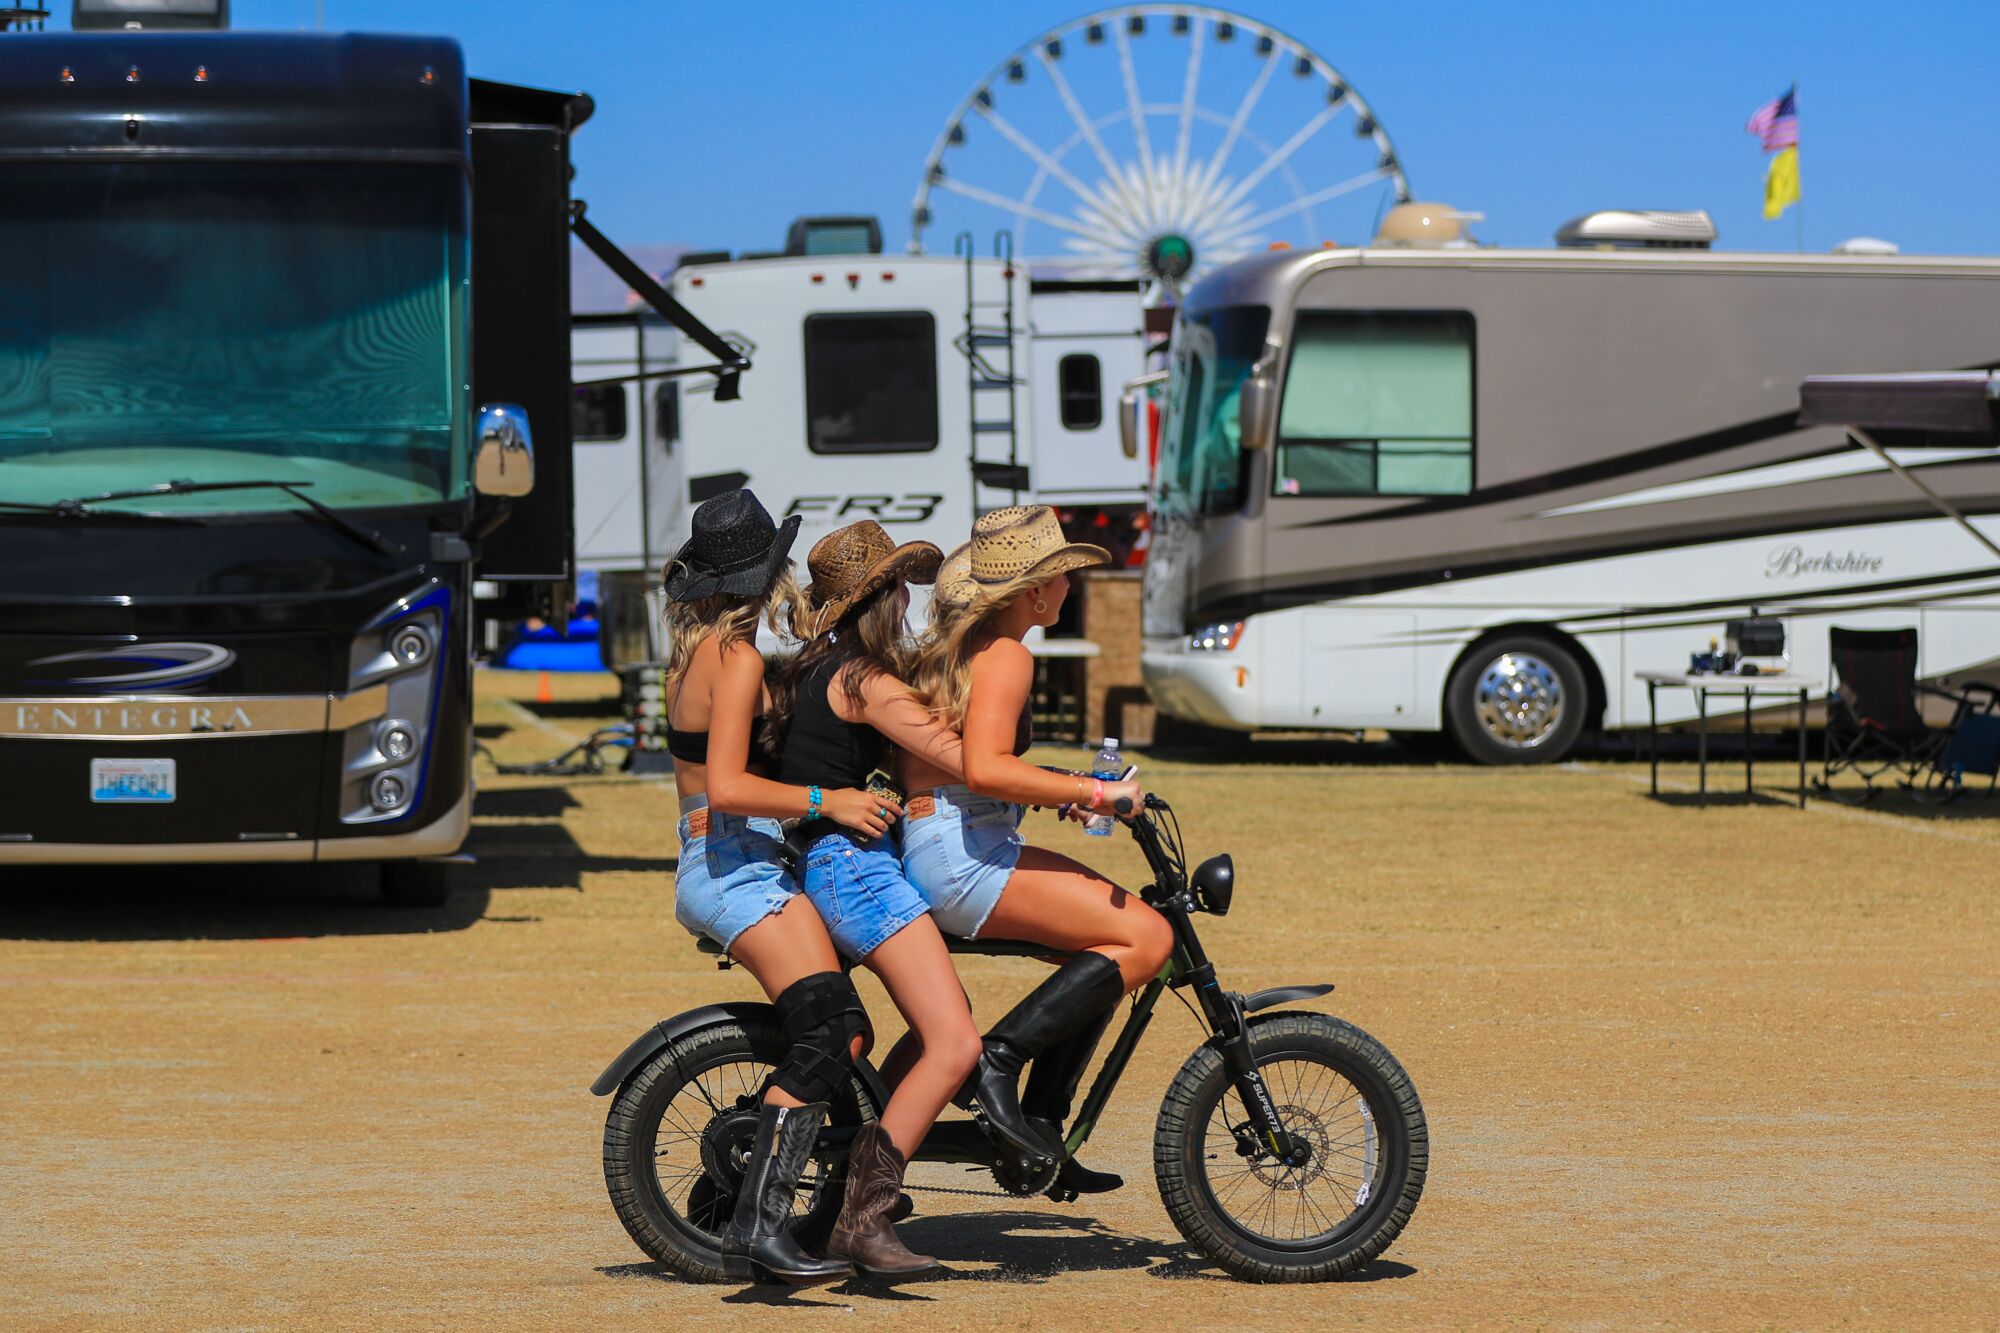 Three women in cowboy boots, hats and shorts ride electric bicycles in the Stagecoach campsite.